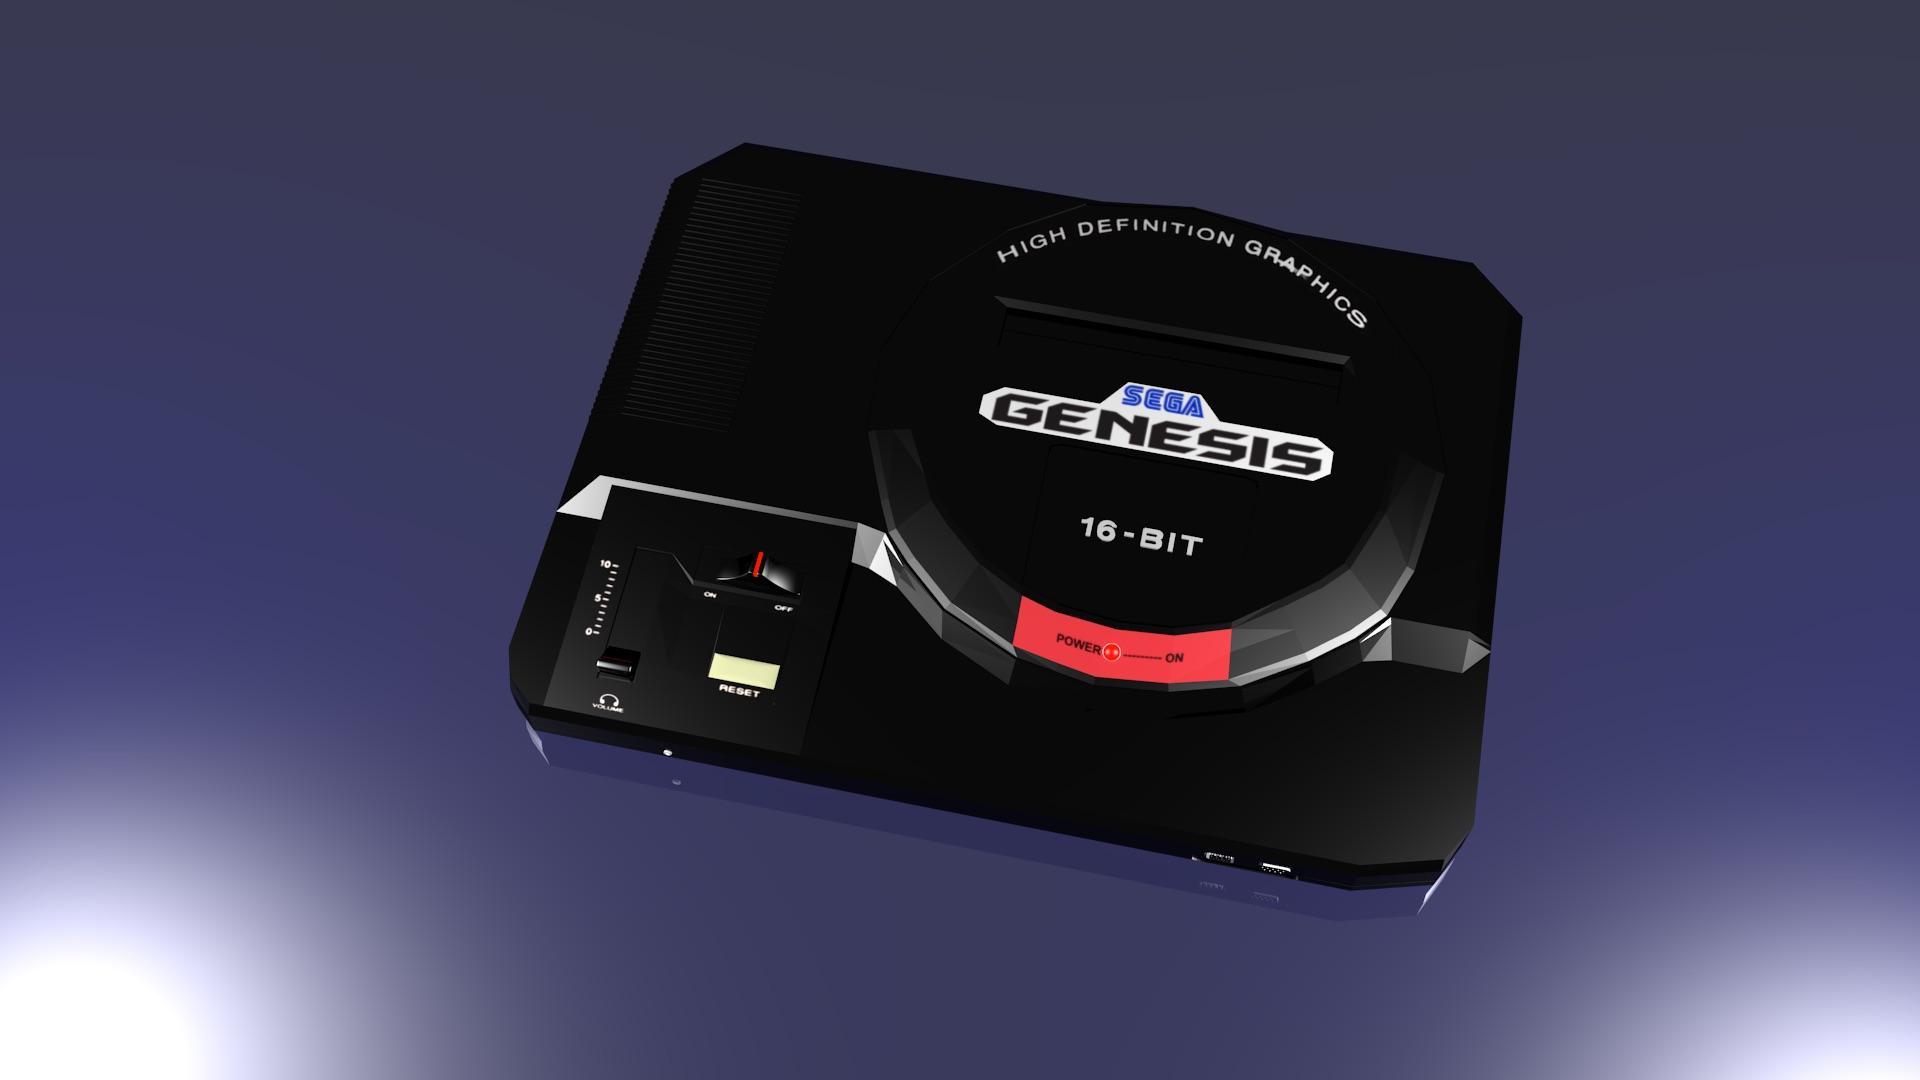 My first attempt at making a Sega Genesis. Feedback welcomed!